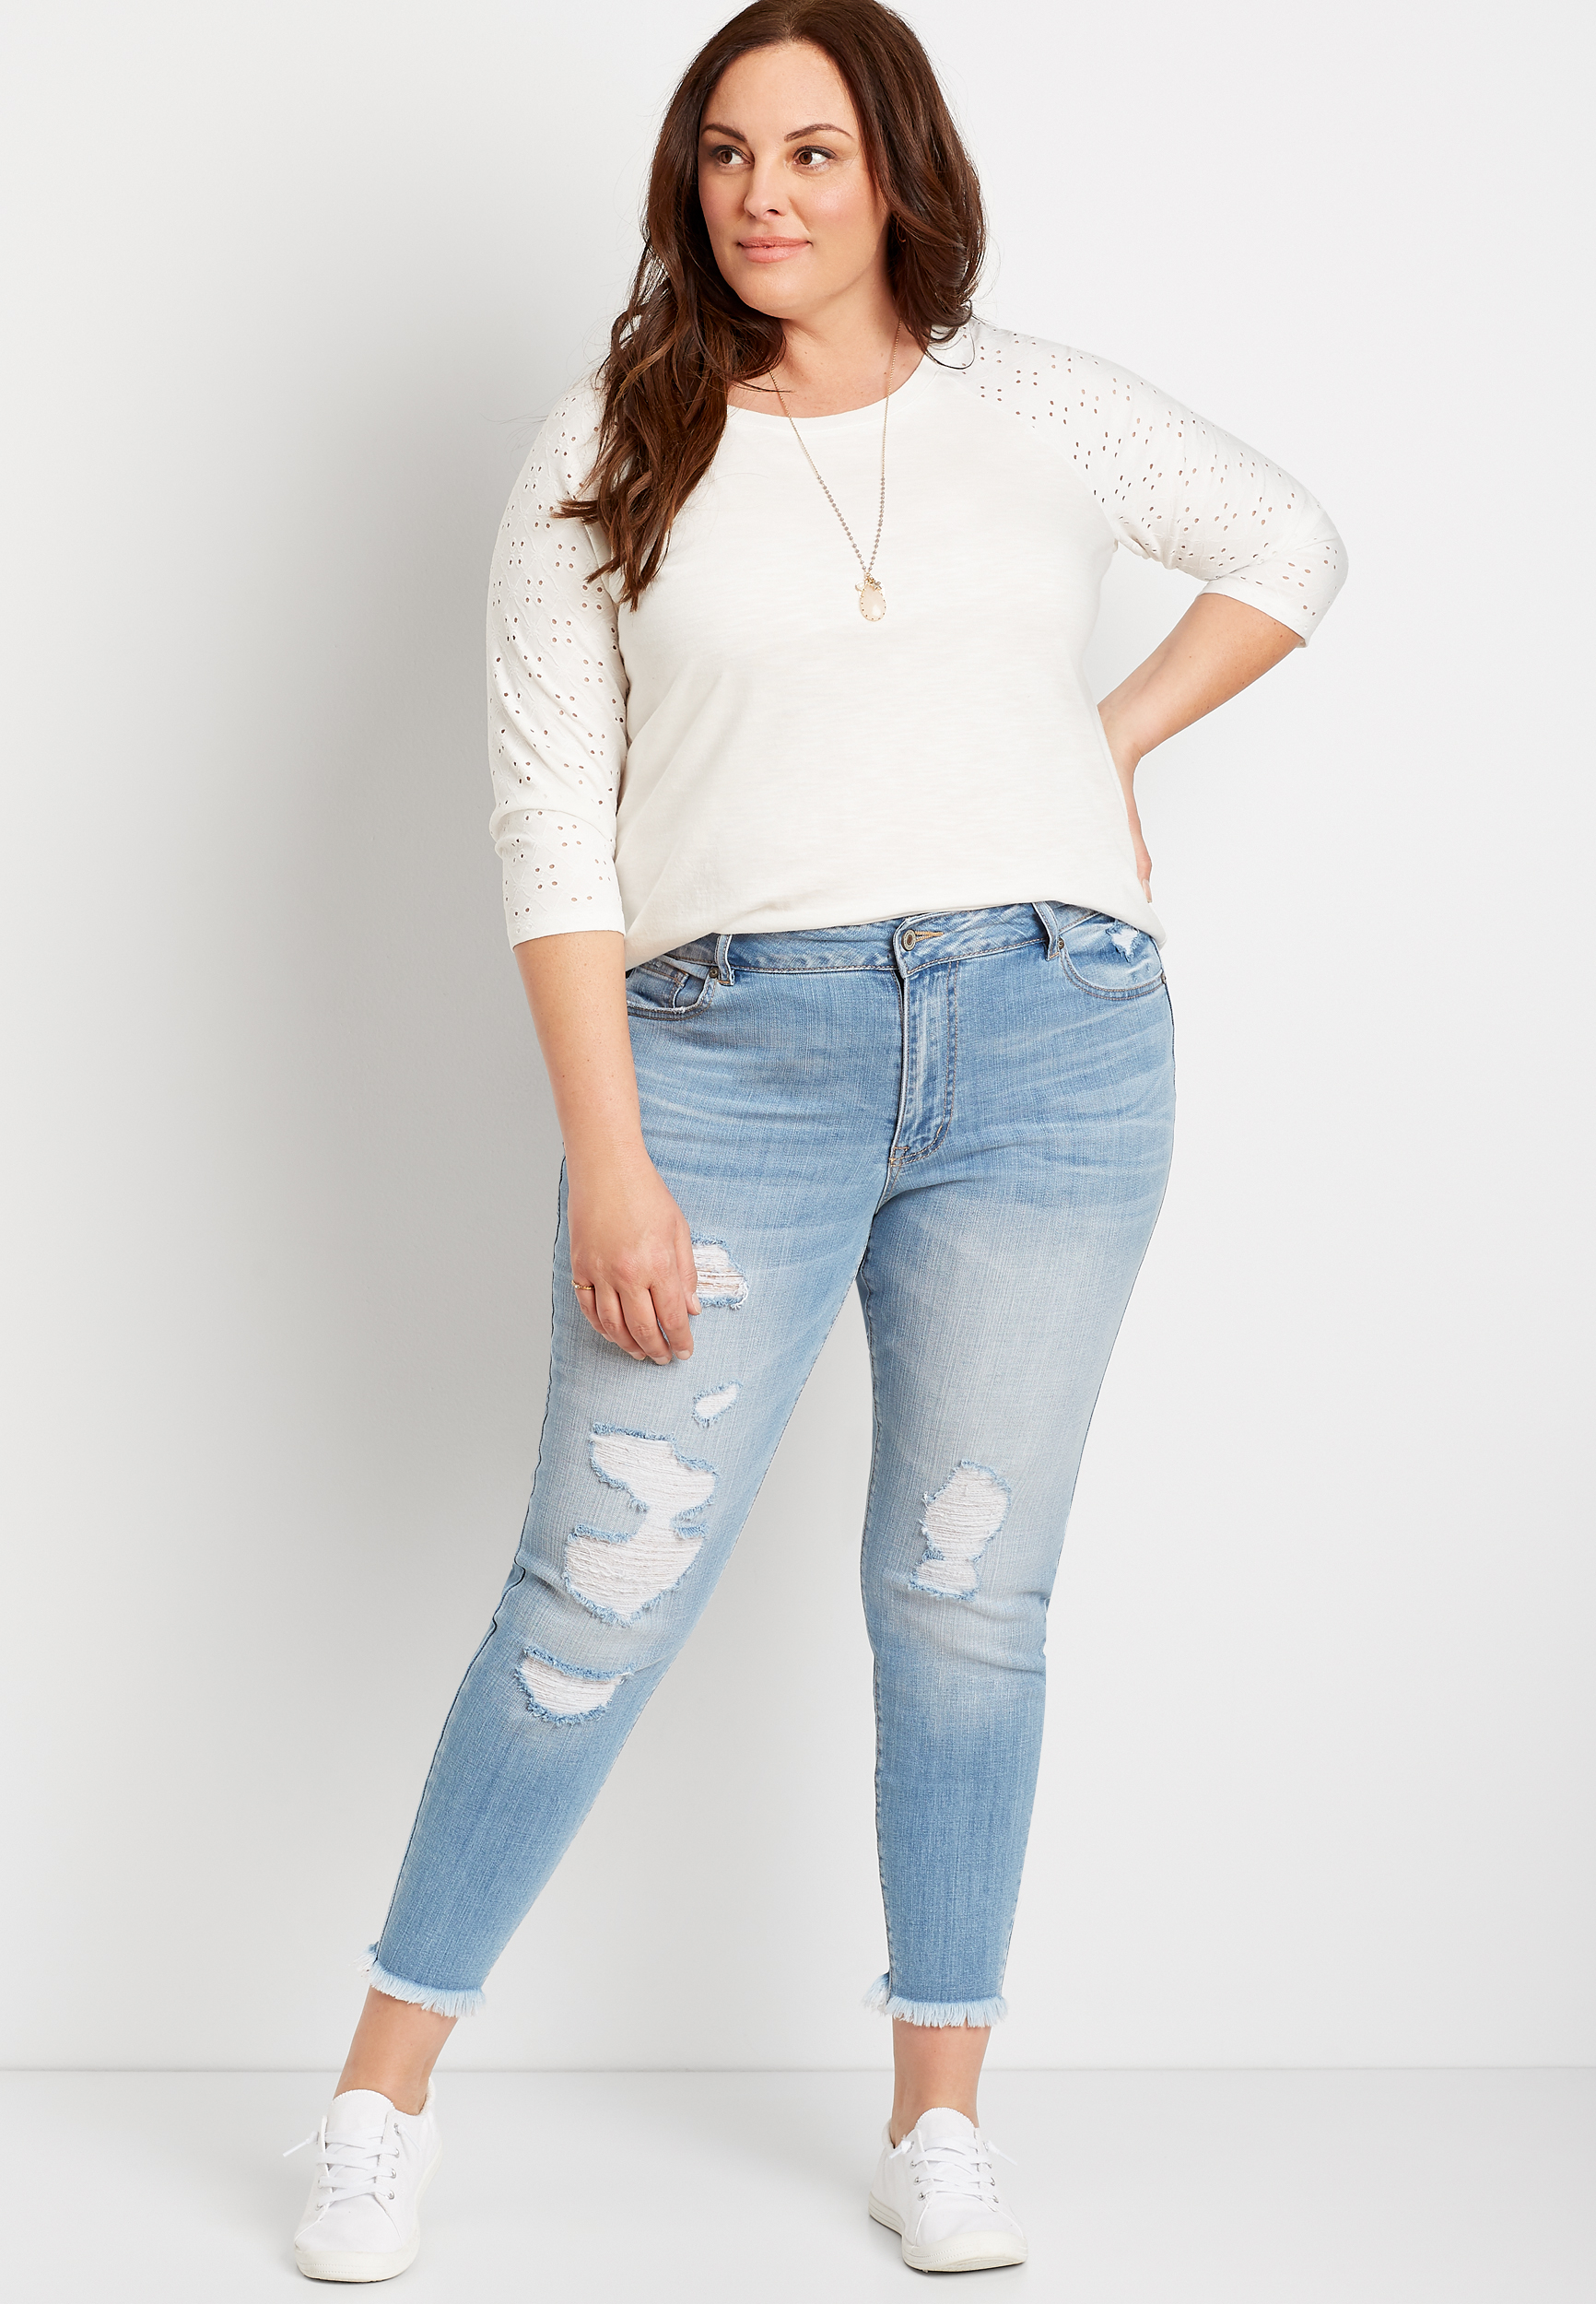 Plus Size KanCan™ High Rise Light Wash Ripped Skinny Jean | maurices